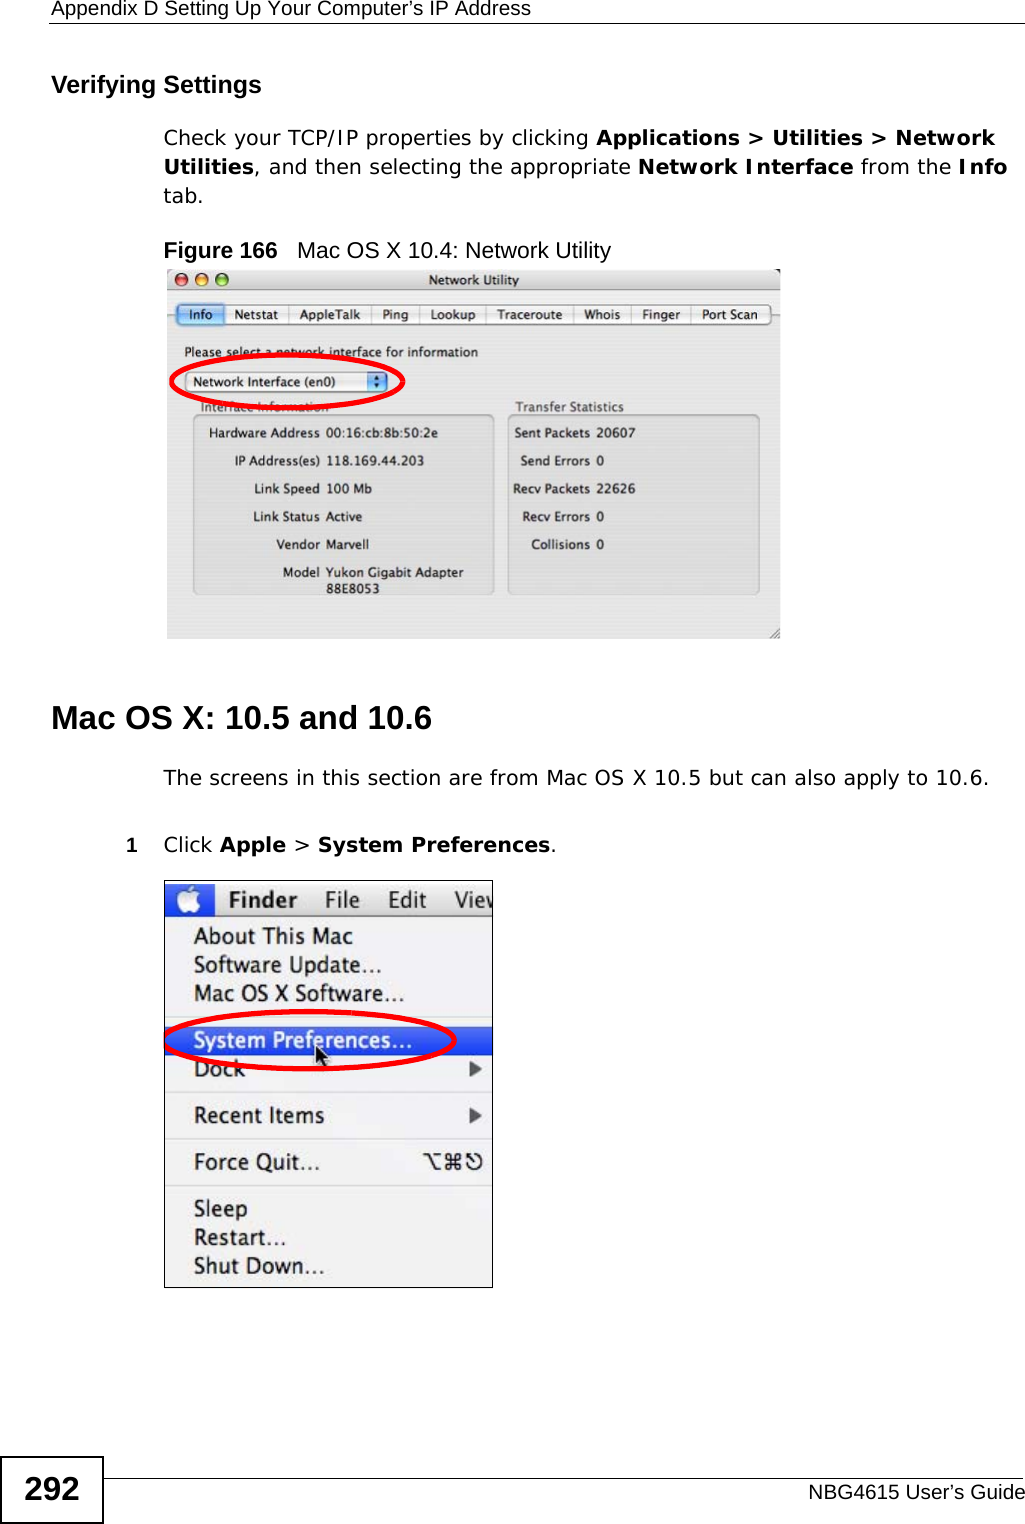 Appendix D Setting Up Your Computer’s IP AddressNBG4615 User’s Guide292Verifying SettingsCheck your TCP/IP properties by clicking Applications &gt; Utilities &gt; Network Utilities, and then selecting the appropriate Network Interface from the Info tab.Figure 166   Mac OS X 10.4: Network UtilityMac OS X: 10.5 and 10.6The screens in this section are from Mac OS X 10.5 but can also apply to 10.6.1Click Apple &gt; System Preferences.